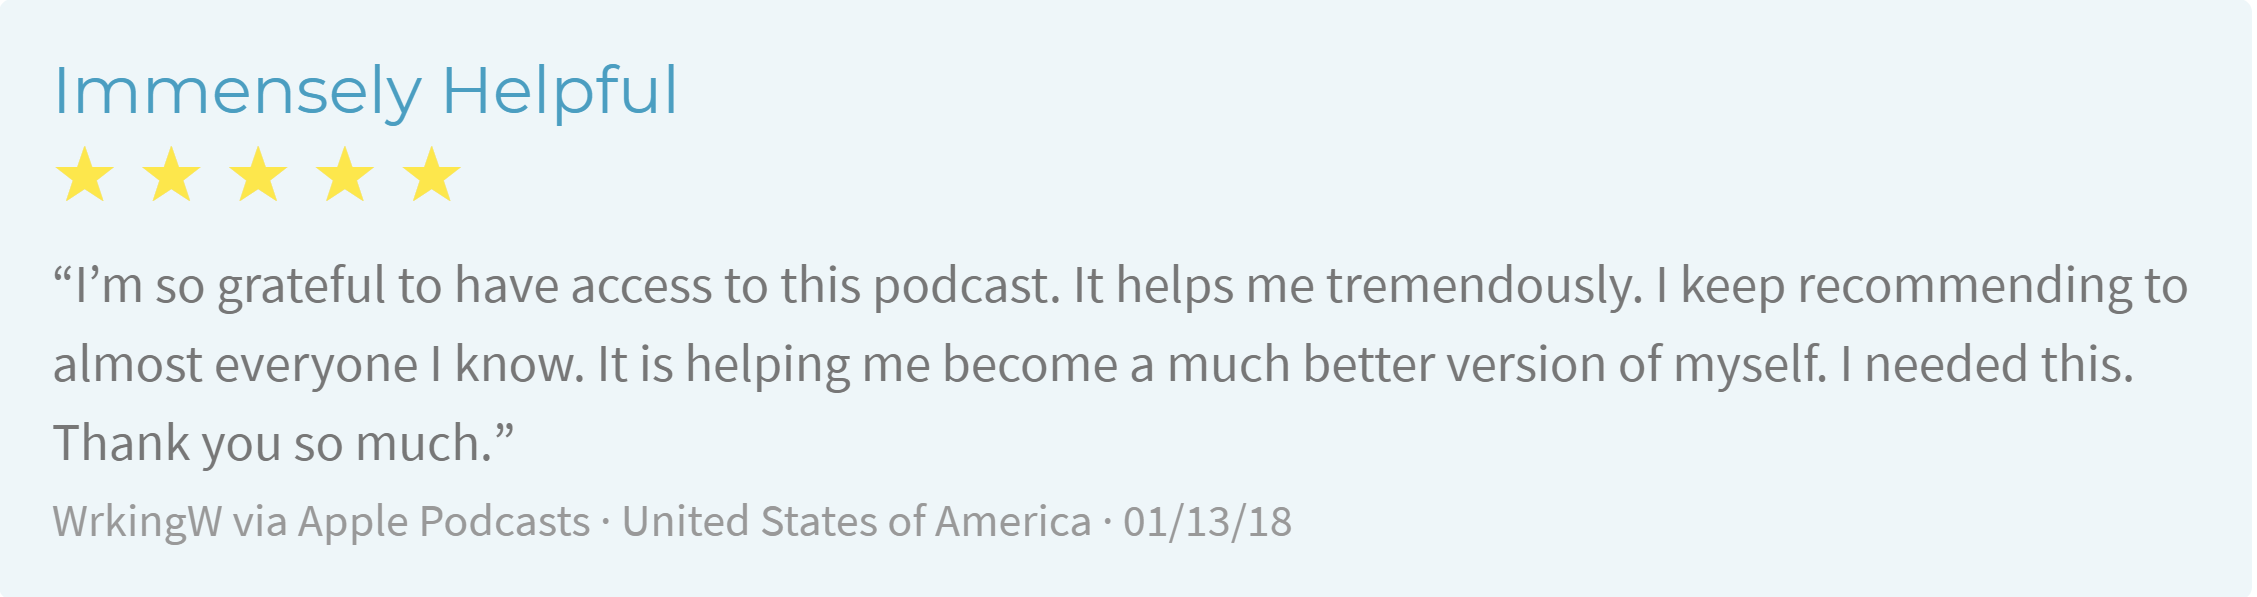 podcast review17.png